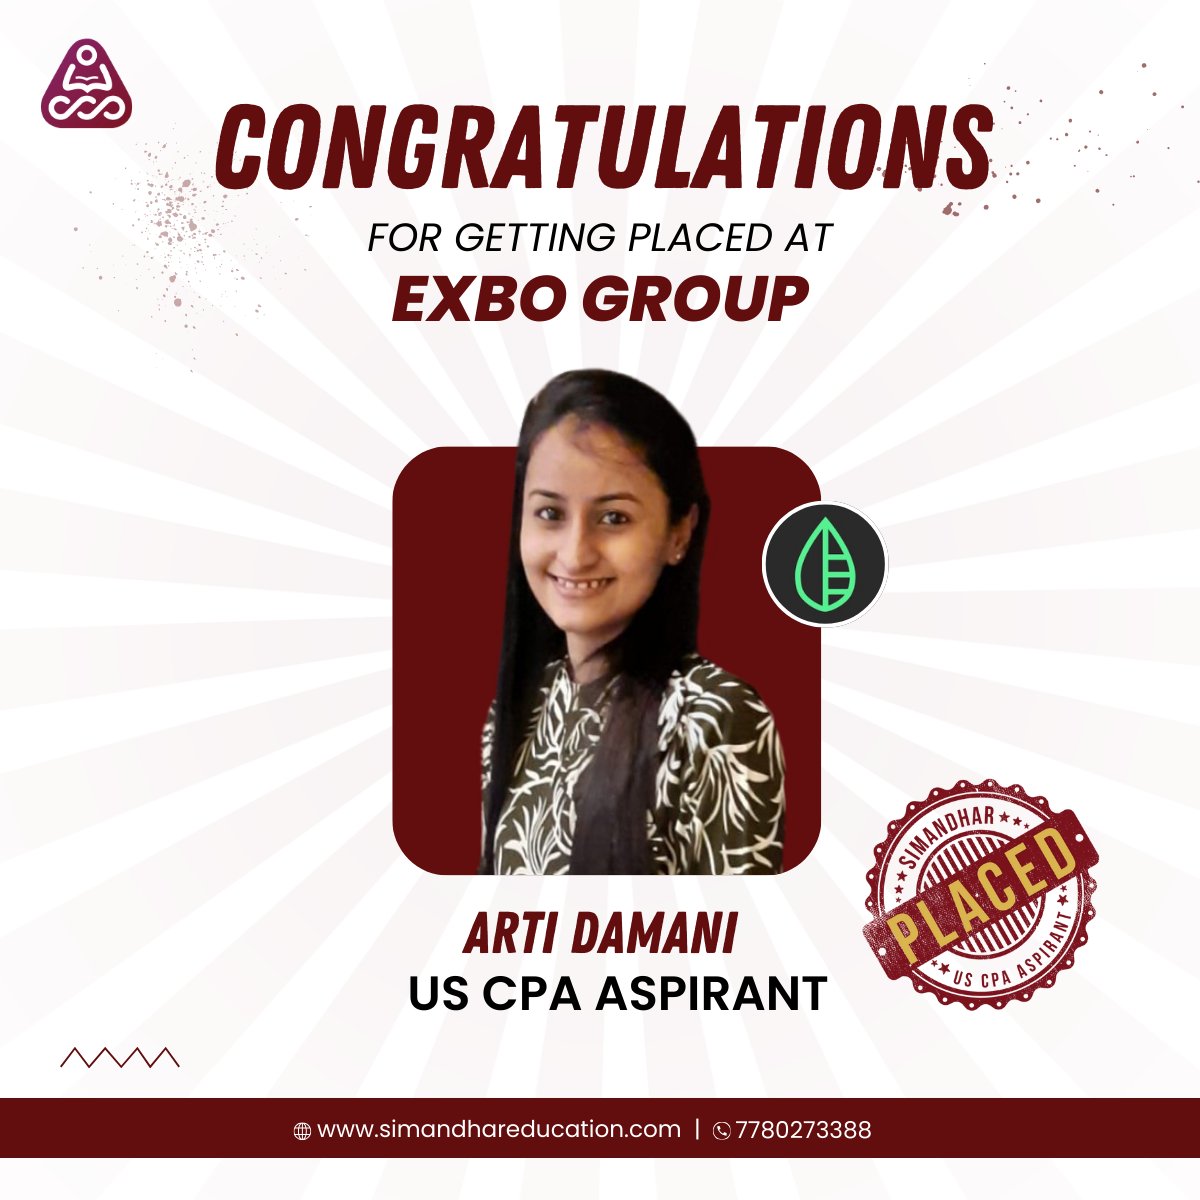 #Congratulations to our US CPA aspirant, Arti Damani, on joining EXBO Group as an Associate.

Here's to a wonderful beginning, Arti!

#ThinkCPAThinkSimandhar #USCPA #ExboGroup #SeniorAssociate #Placement #Achievement #NewRole #Success #AccountingJobs